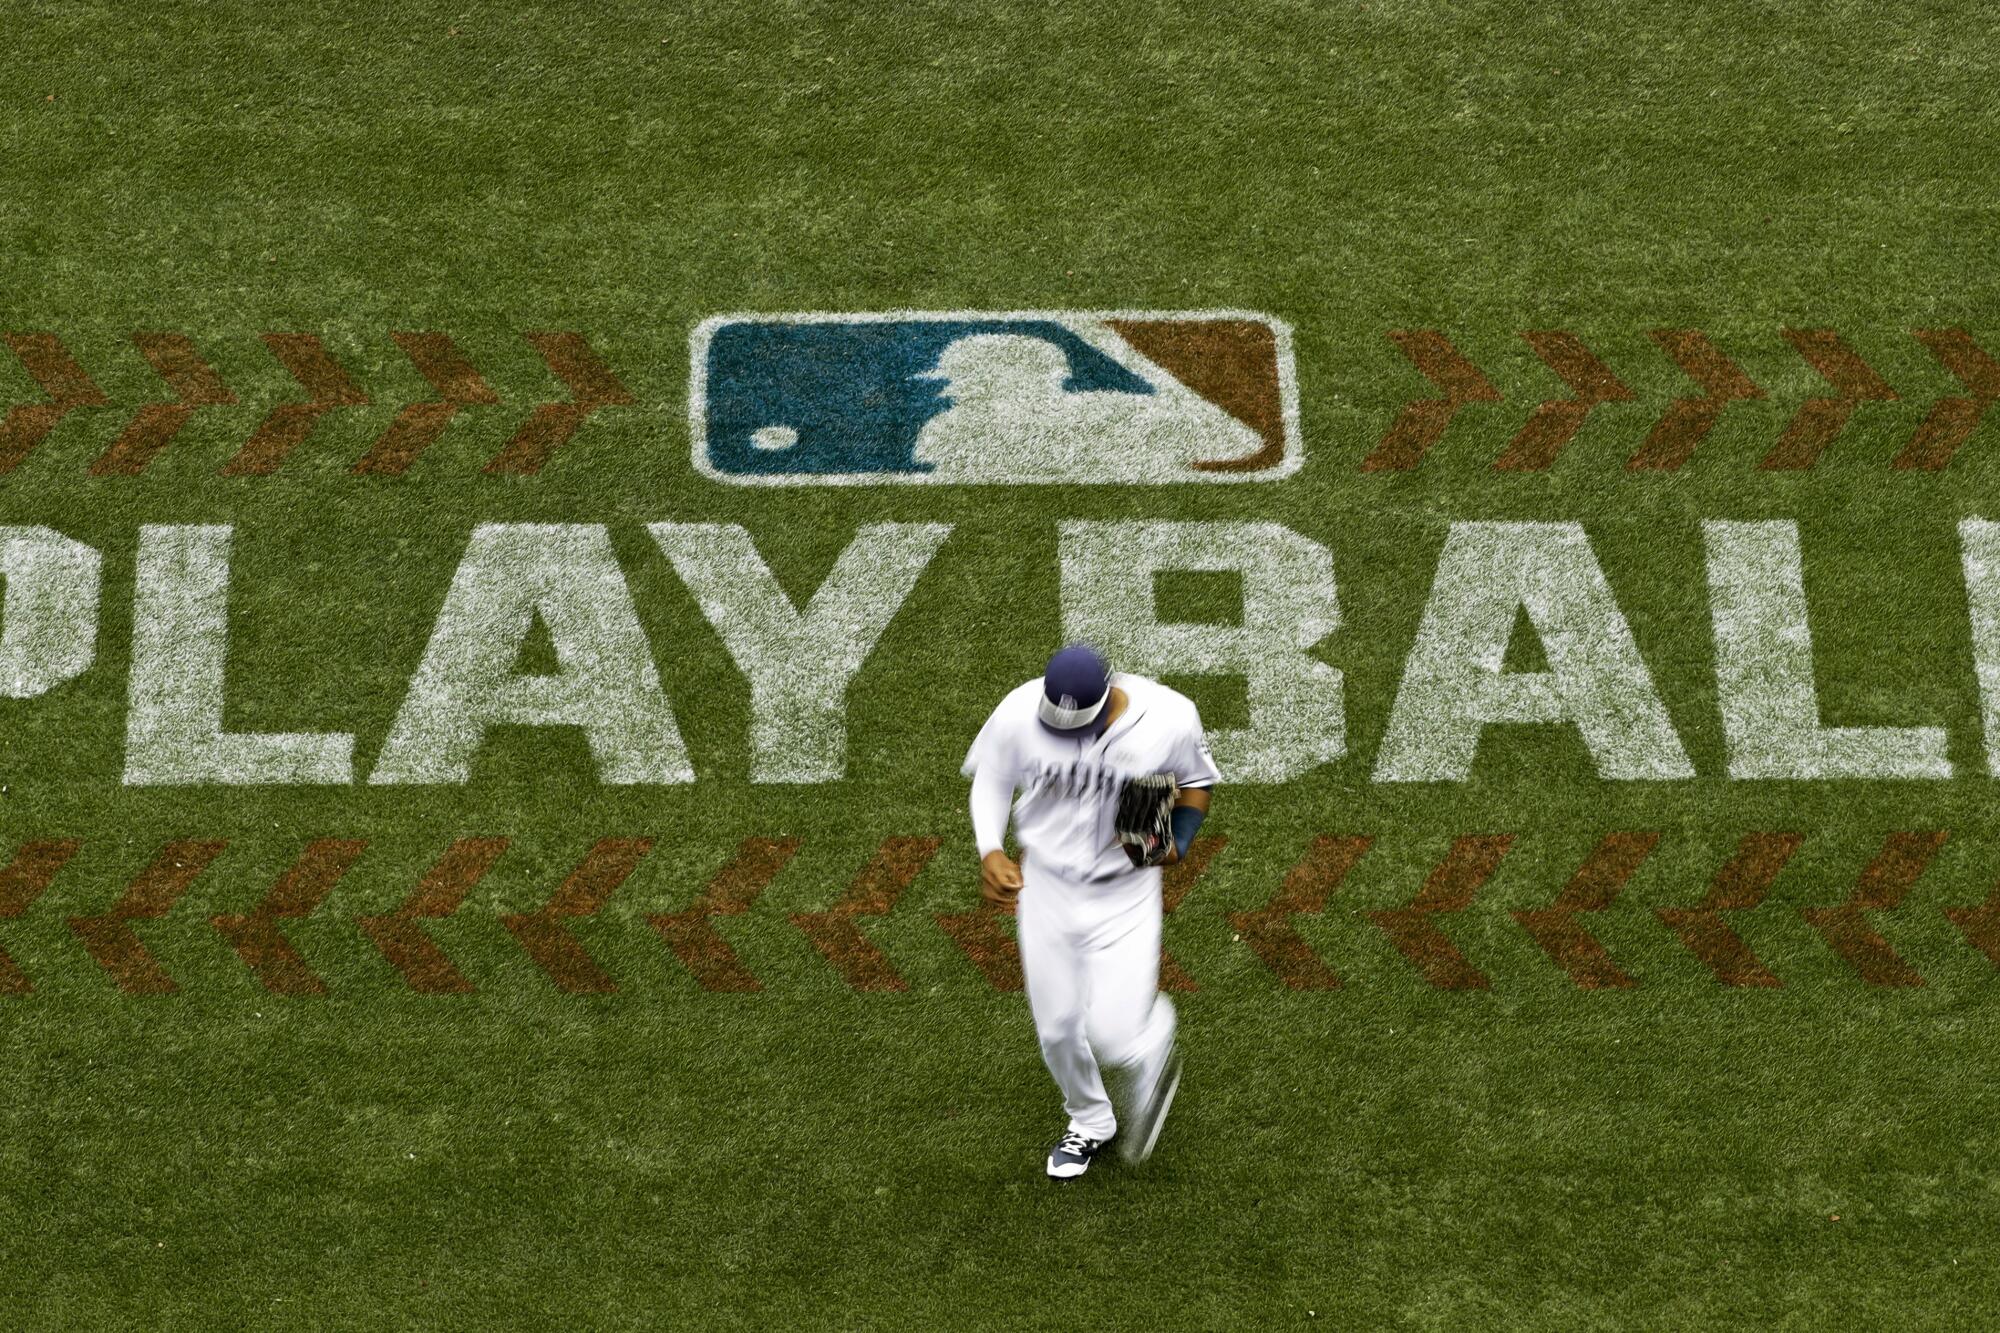 Padres' Allen Cordoba passes a logo on the field for Play Ball, an initiative from MLB and USA Baseball, during a 2017 game.